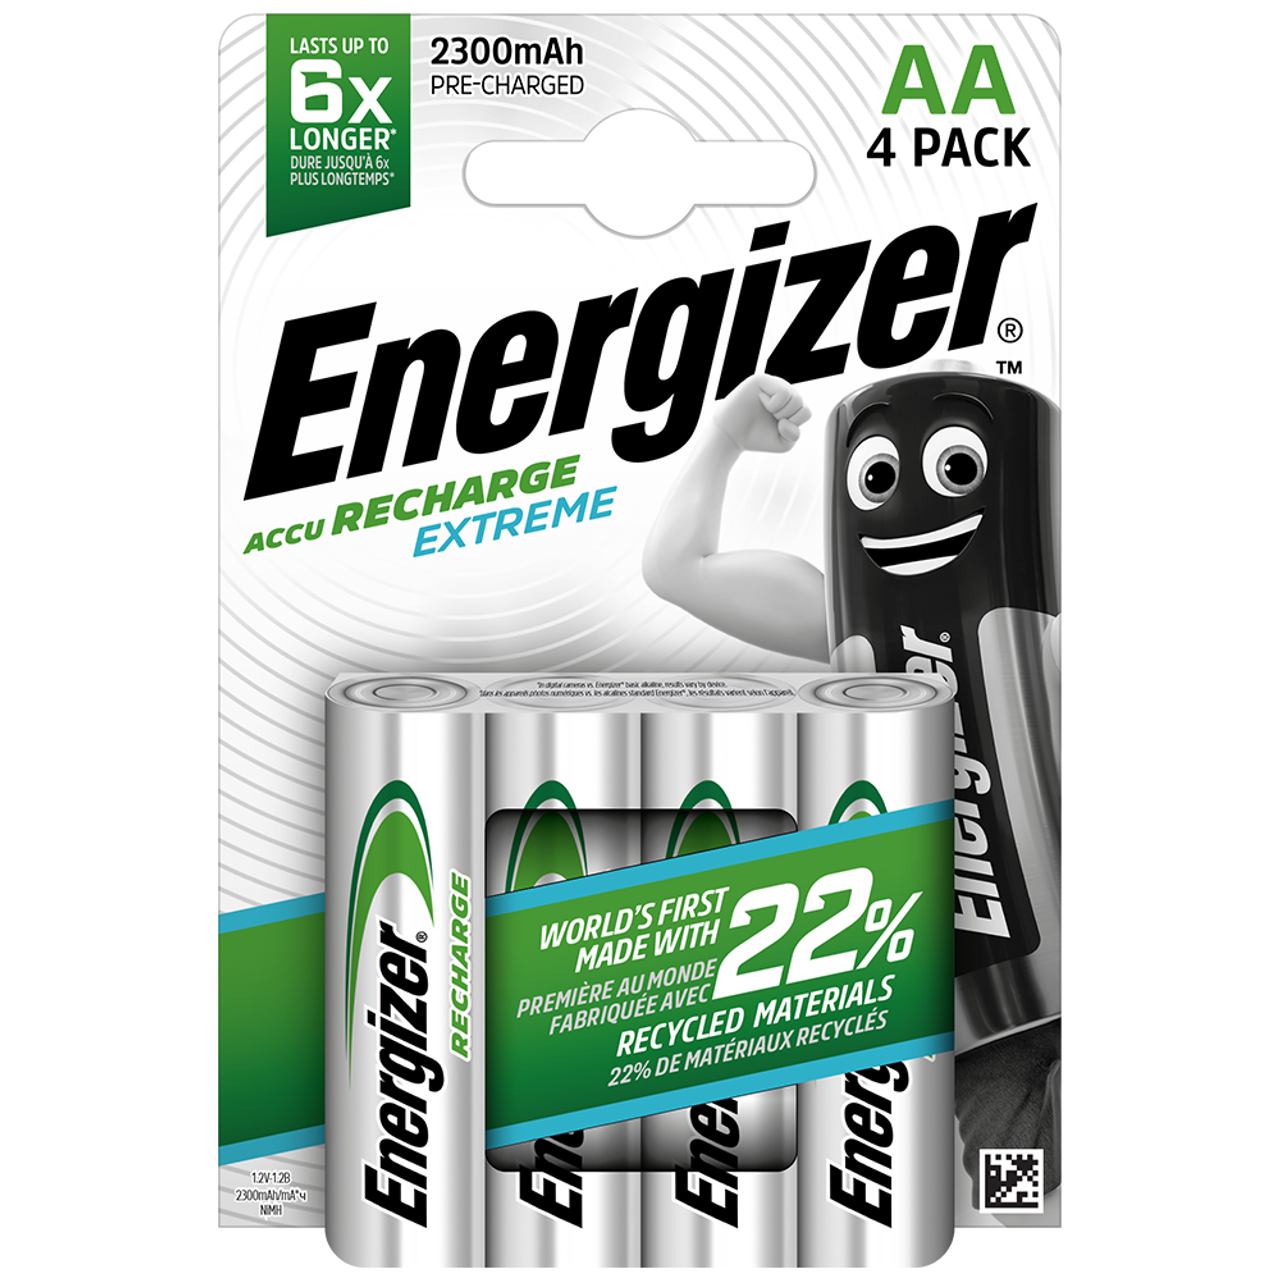 Energizer Extreme AA 2300mAh Pre-charged Rechargeable Batteries